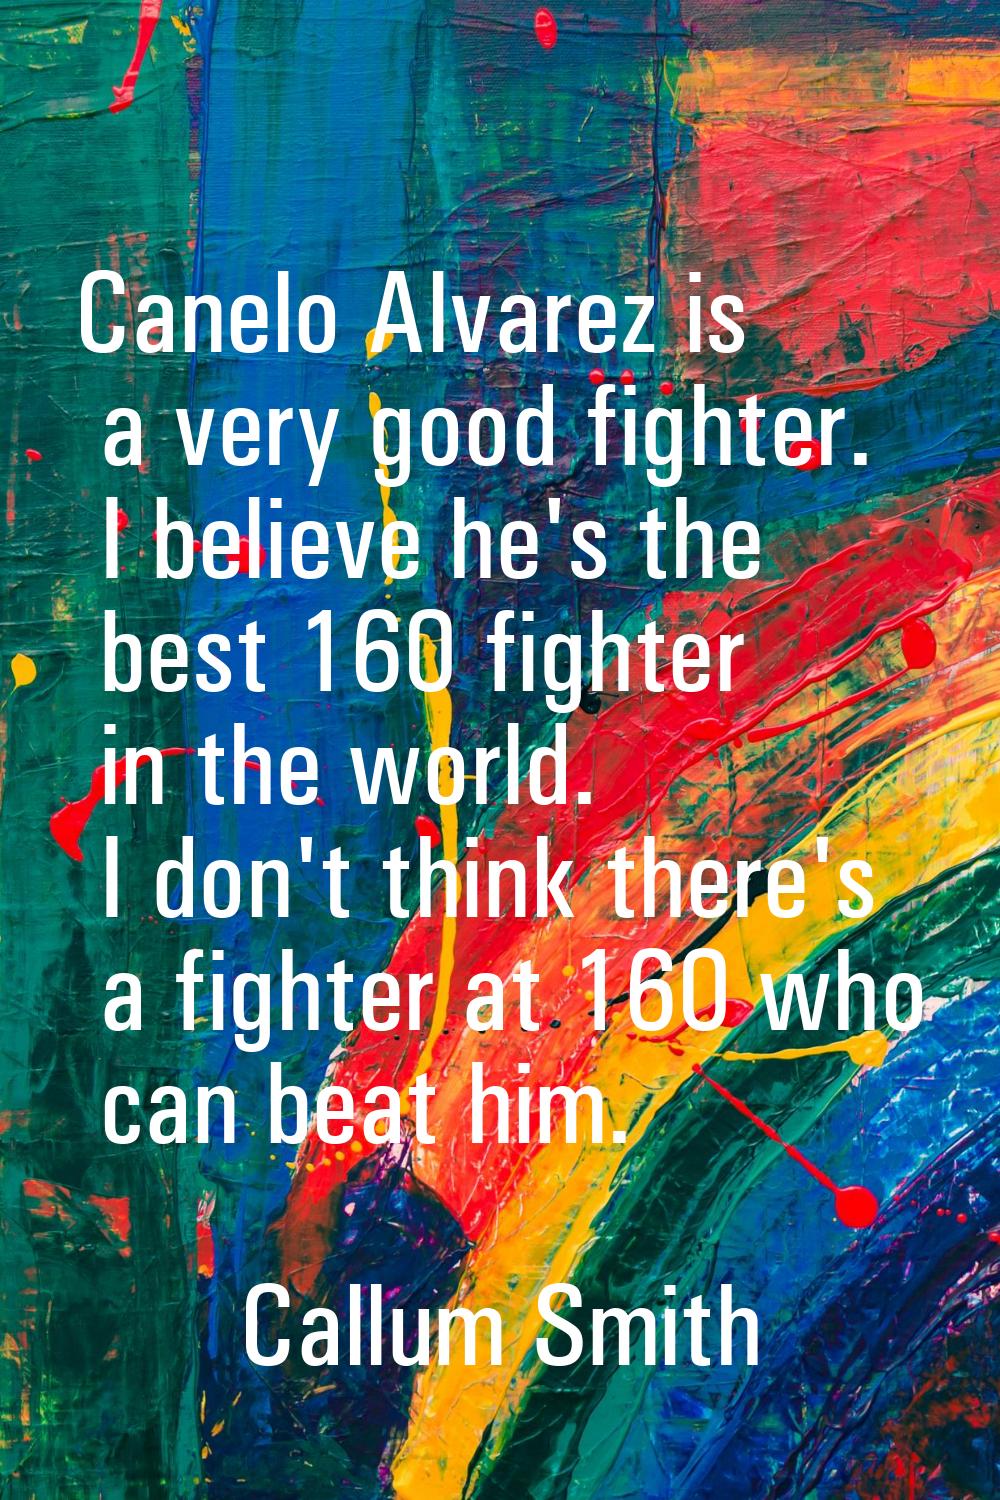 Canelo Alvarez is a very good fighter. I believe he's the best 160 fighter in the world. I don't th